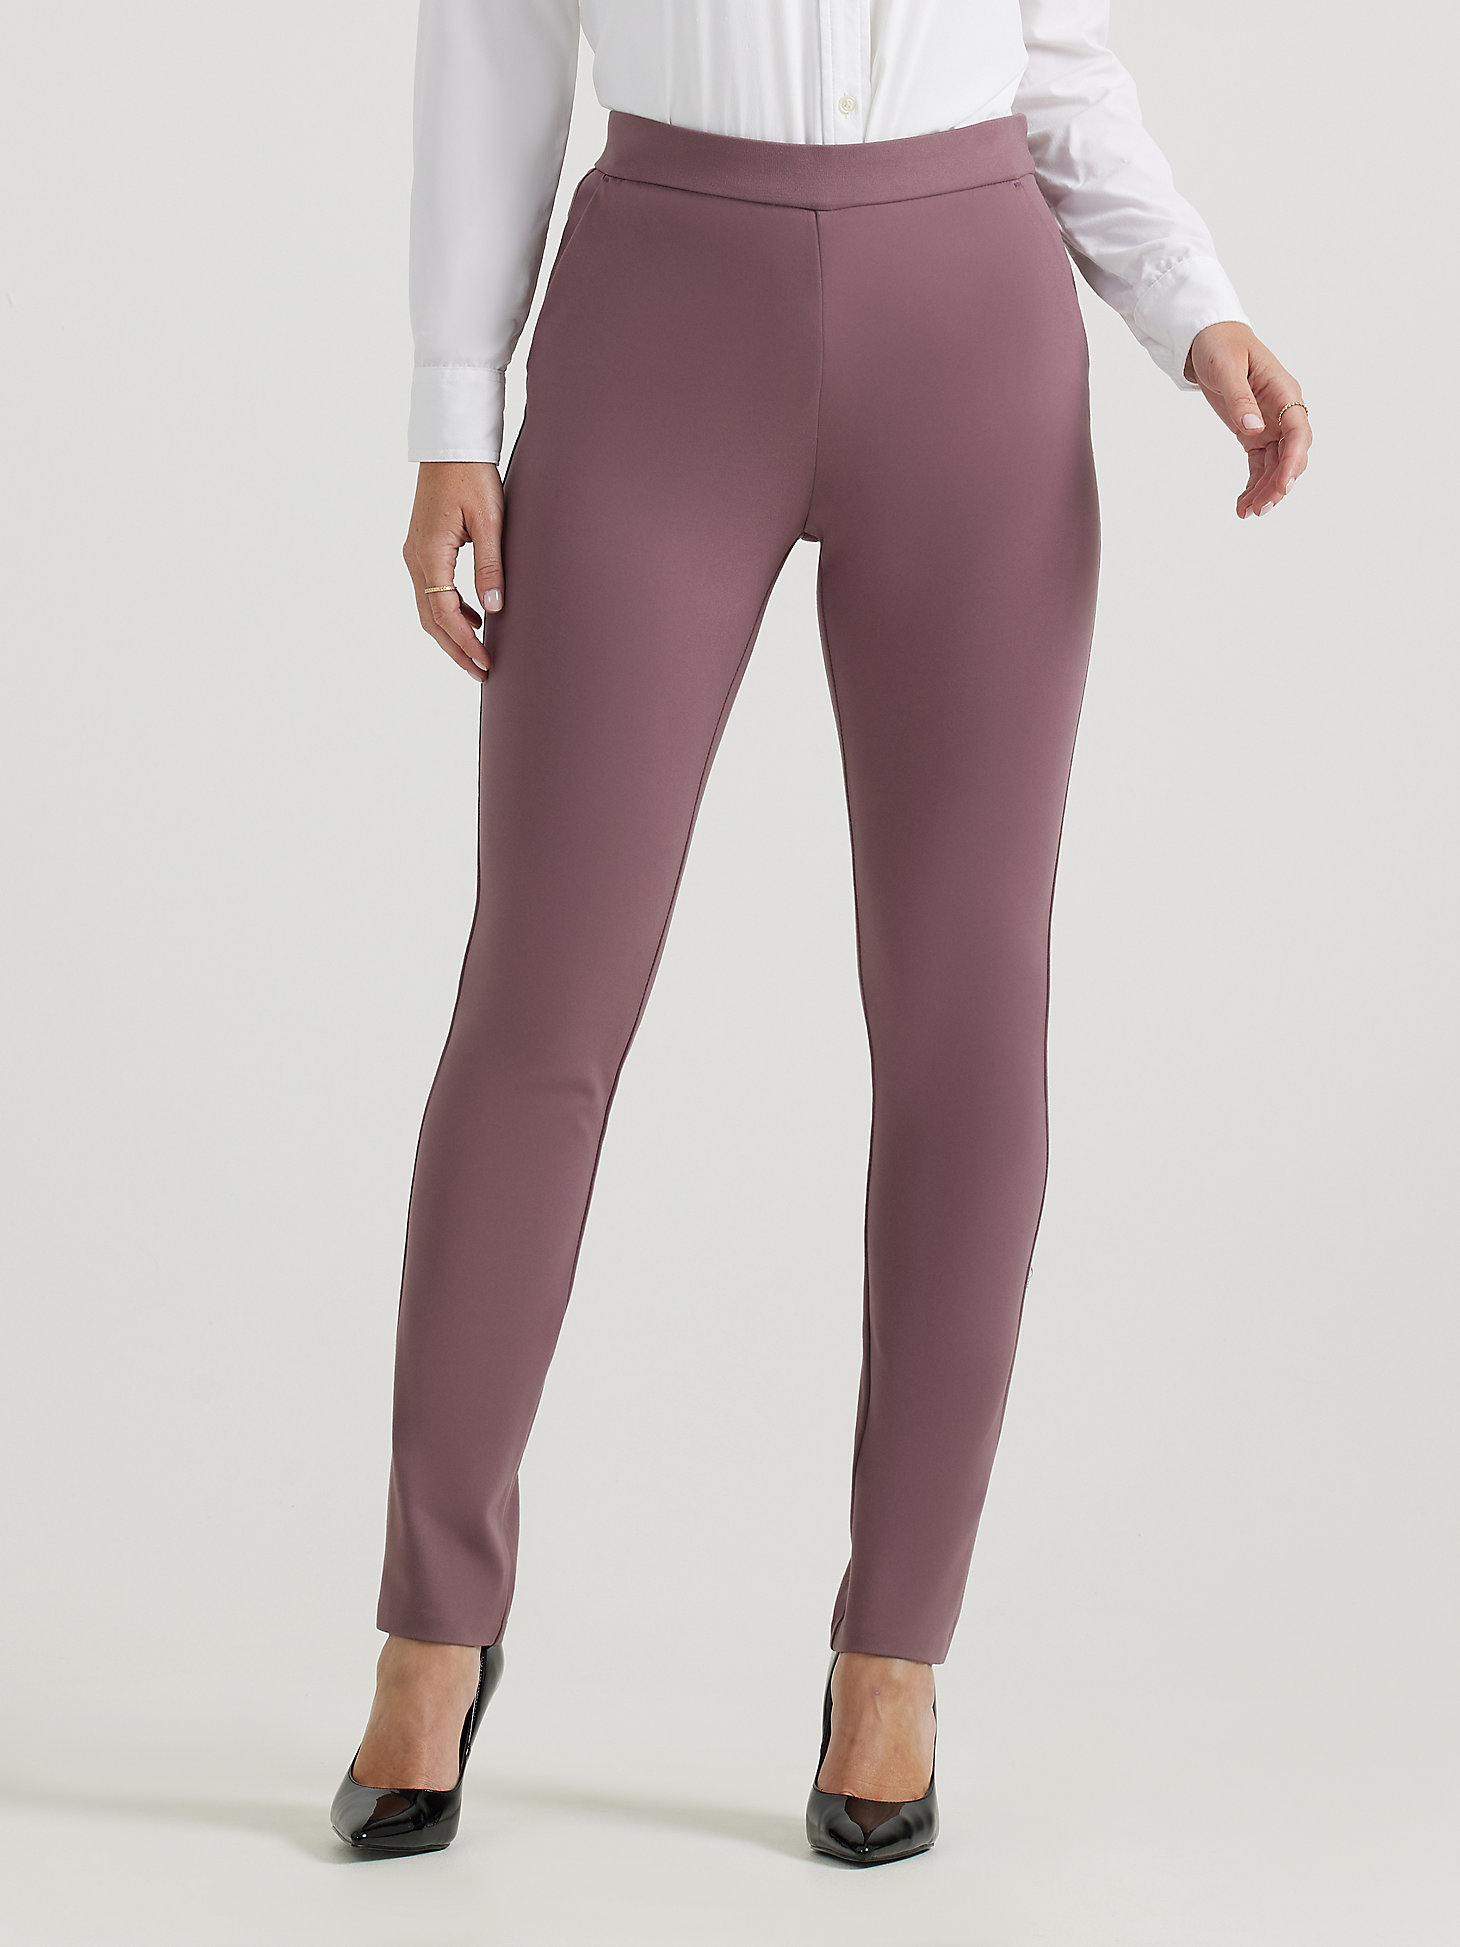 Women's Ultra Lux Slim Fit Ankle Pant in Renaissance main view